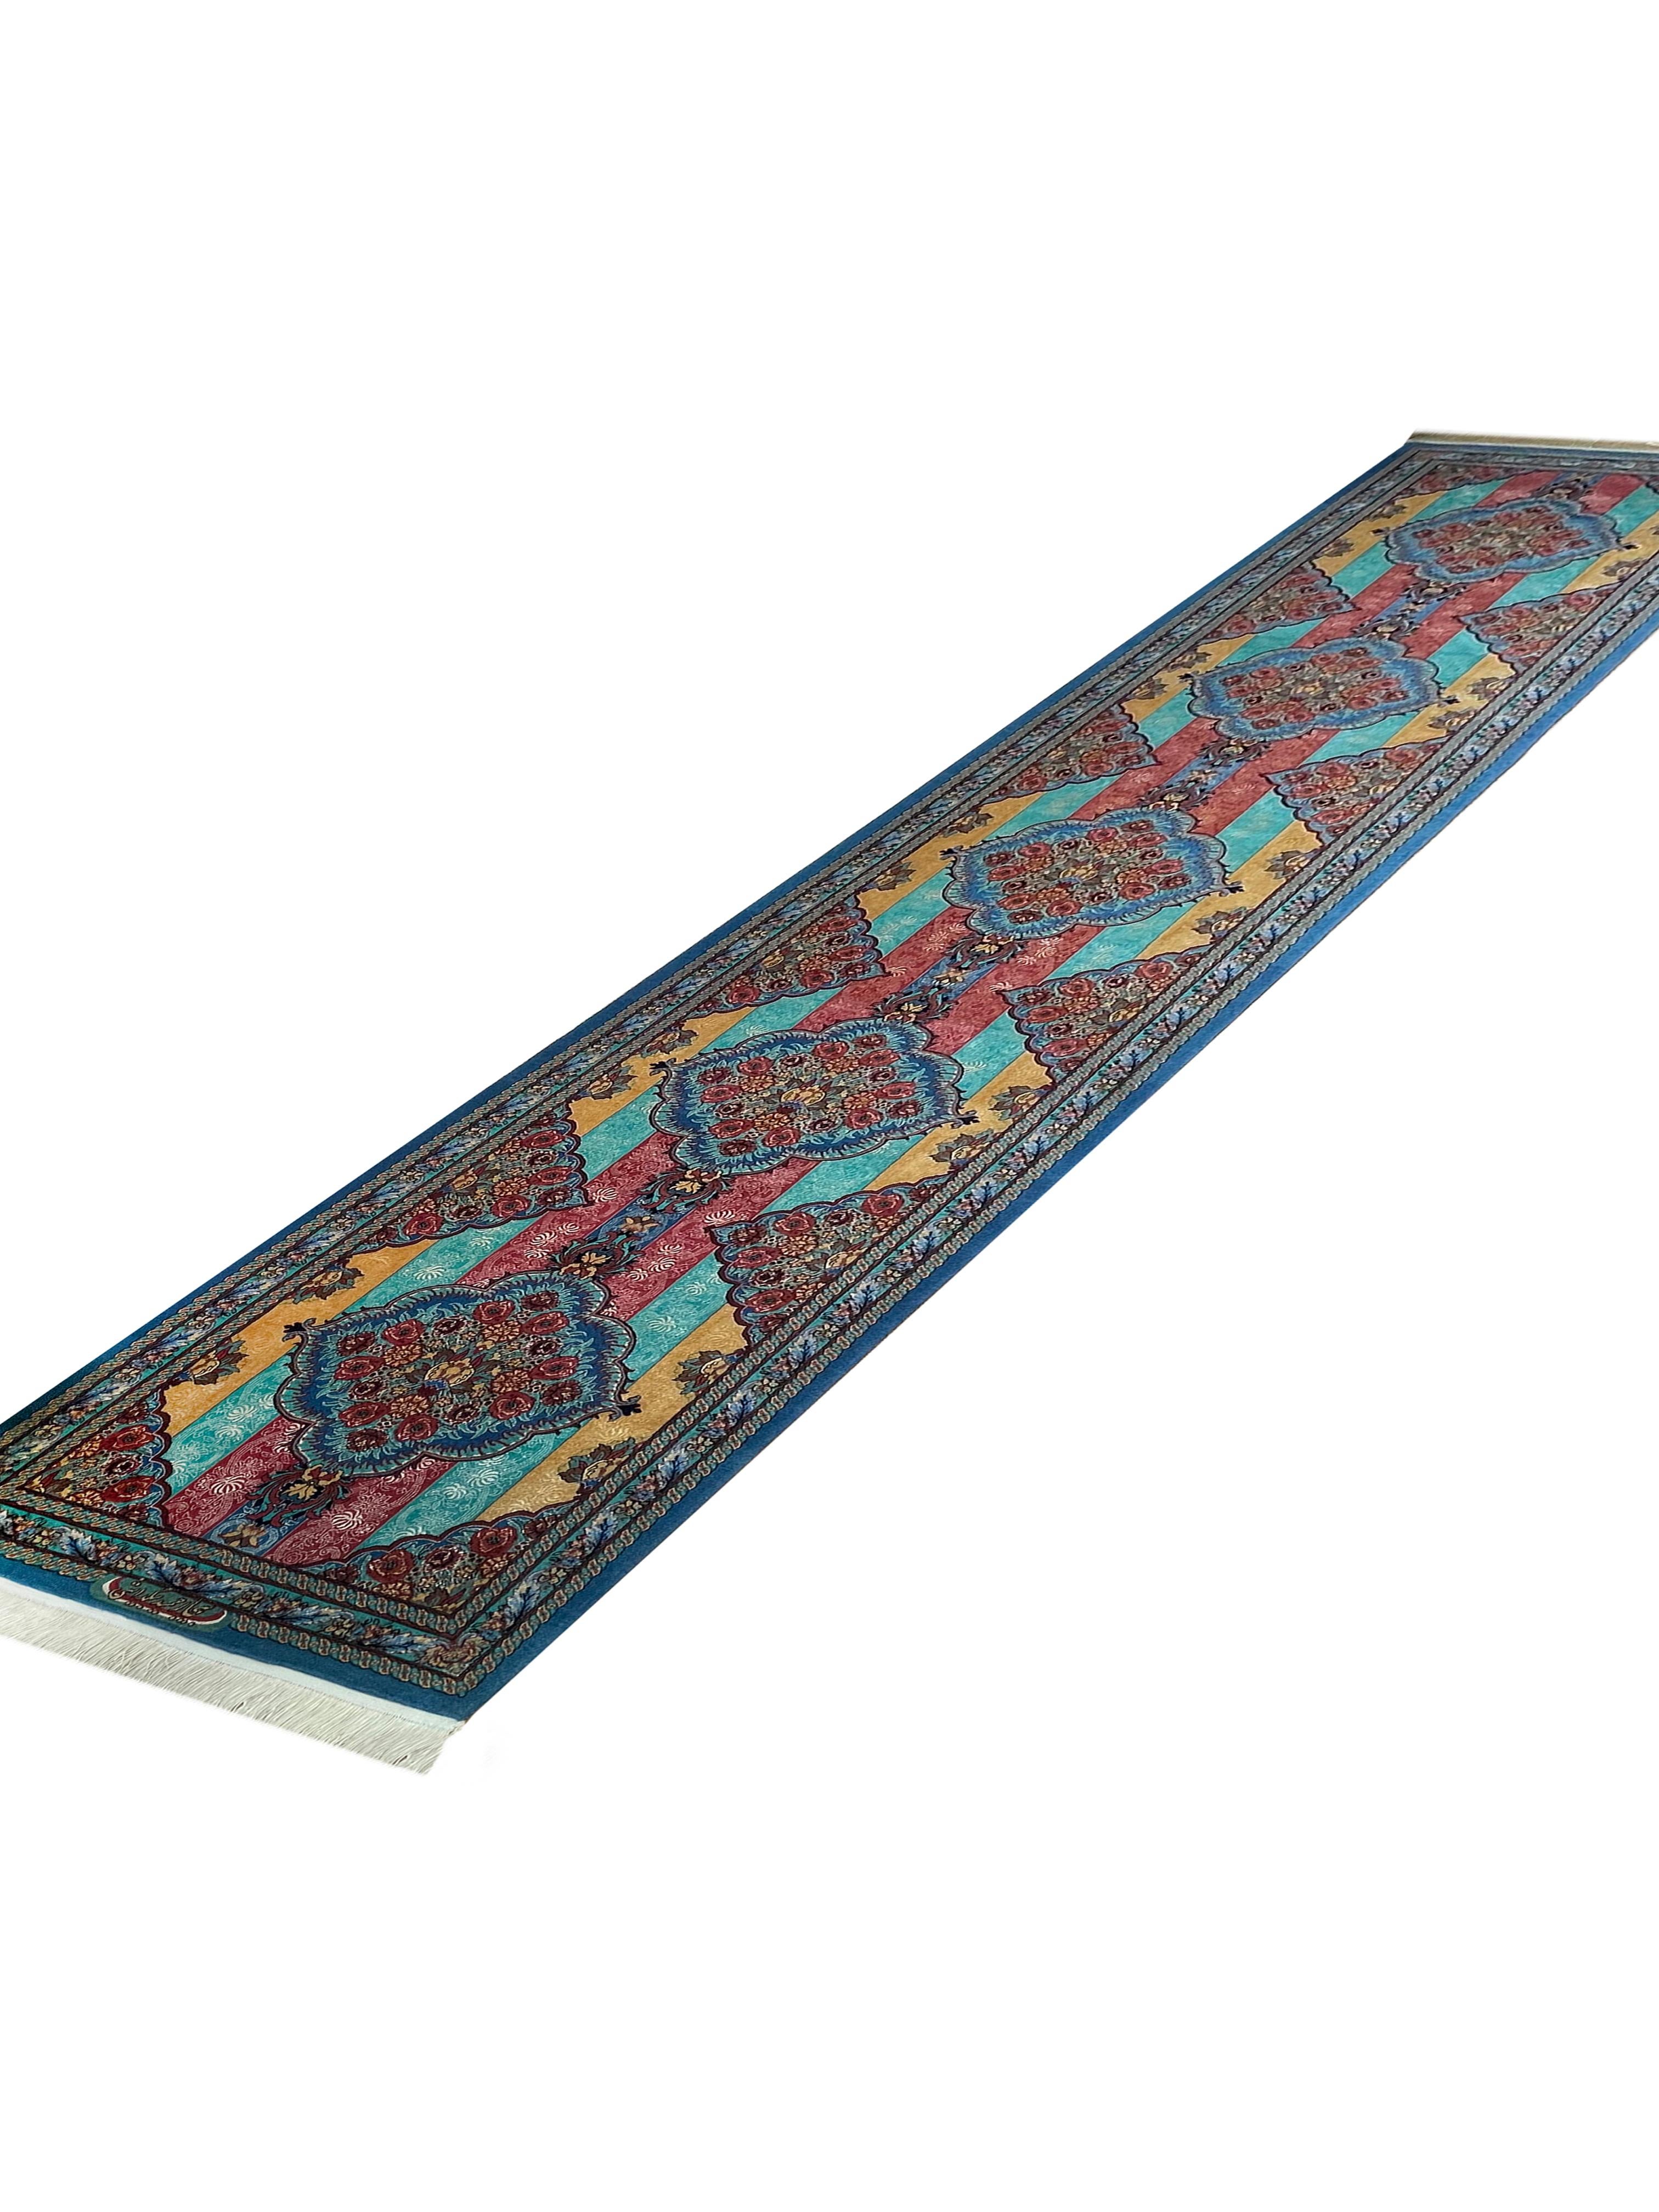 Art Deco Exclusive Handwoven Carpet Runner Turquoise Geometric Striped Area Rug For Sale